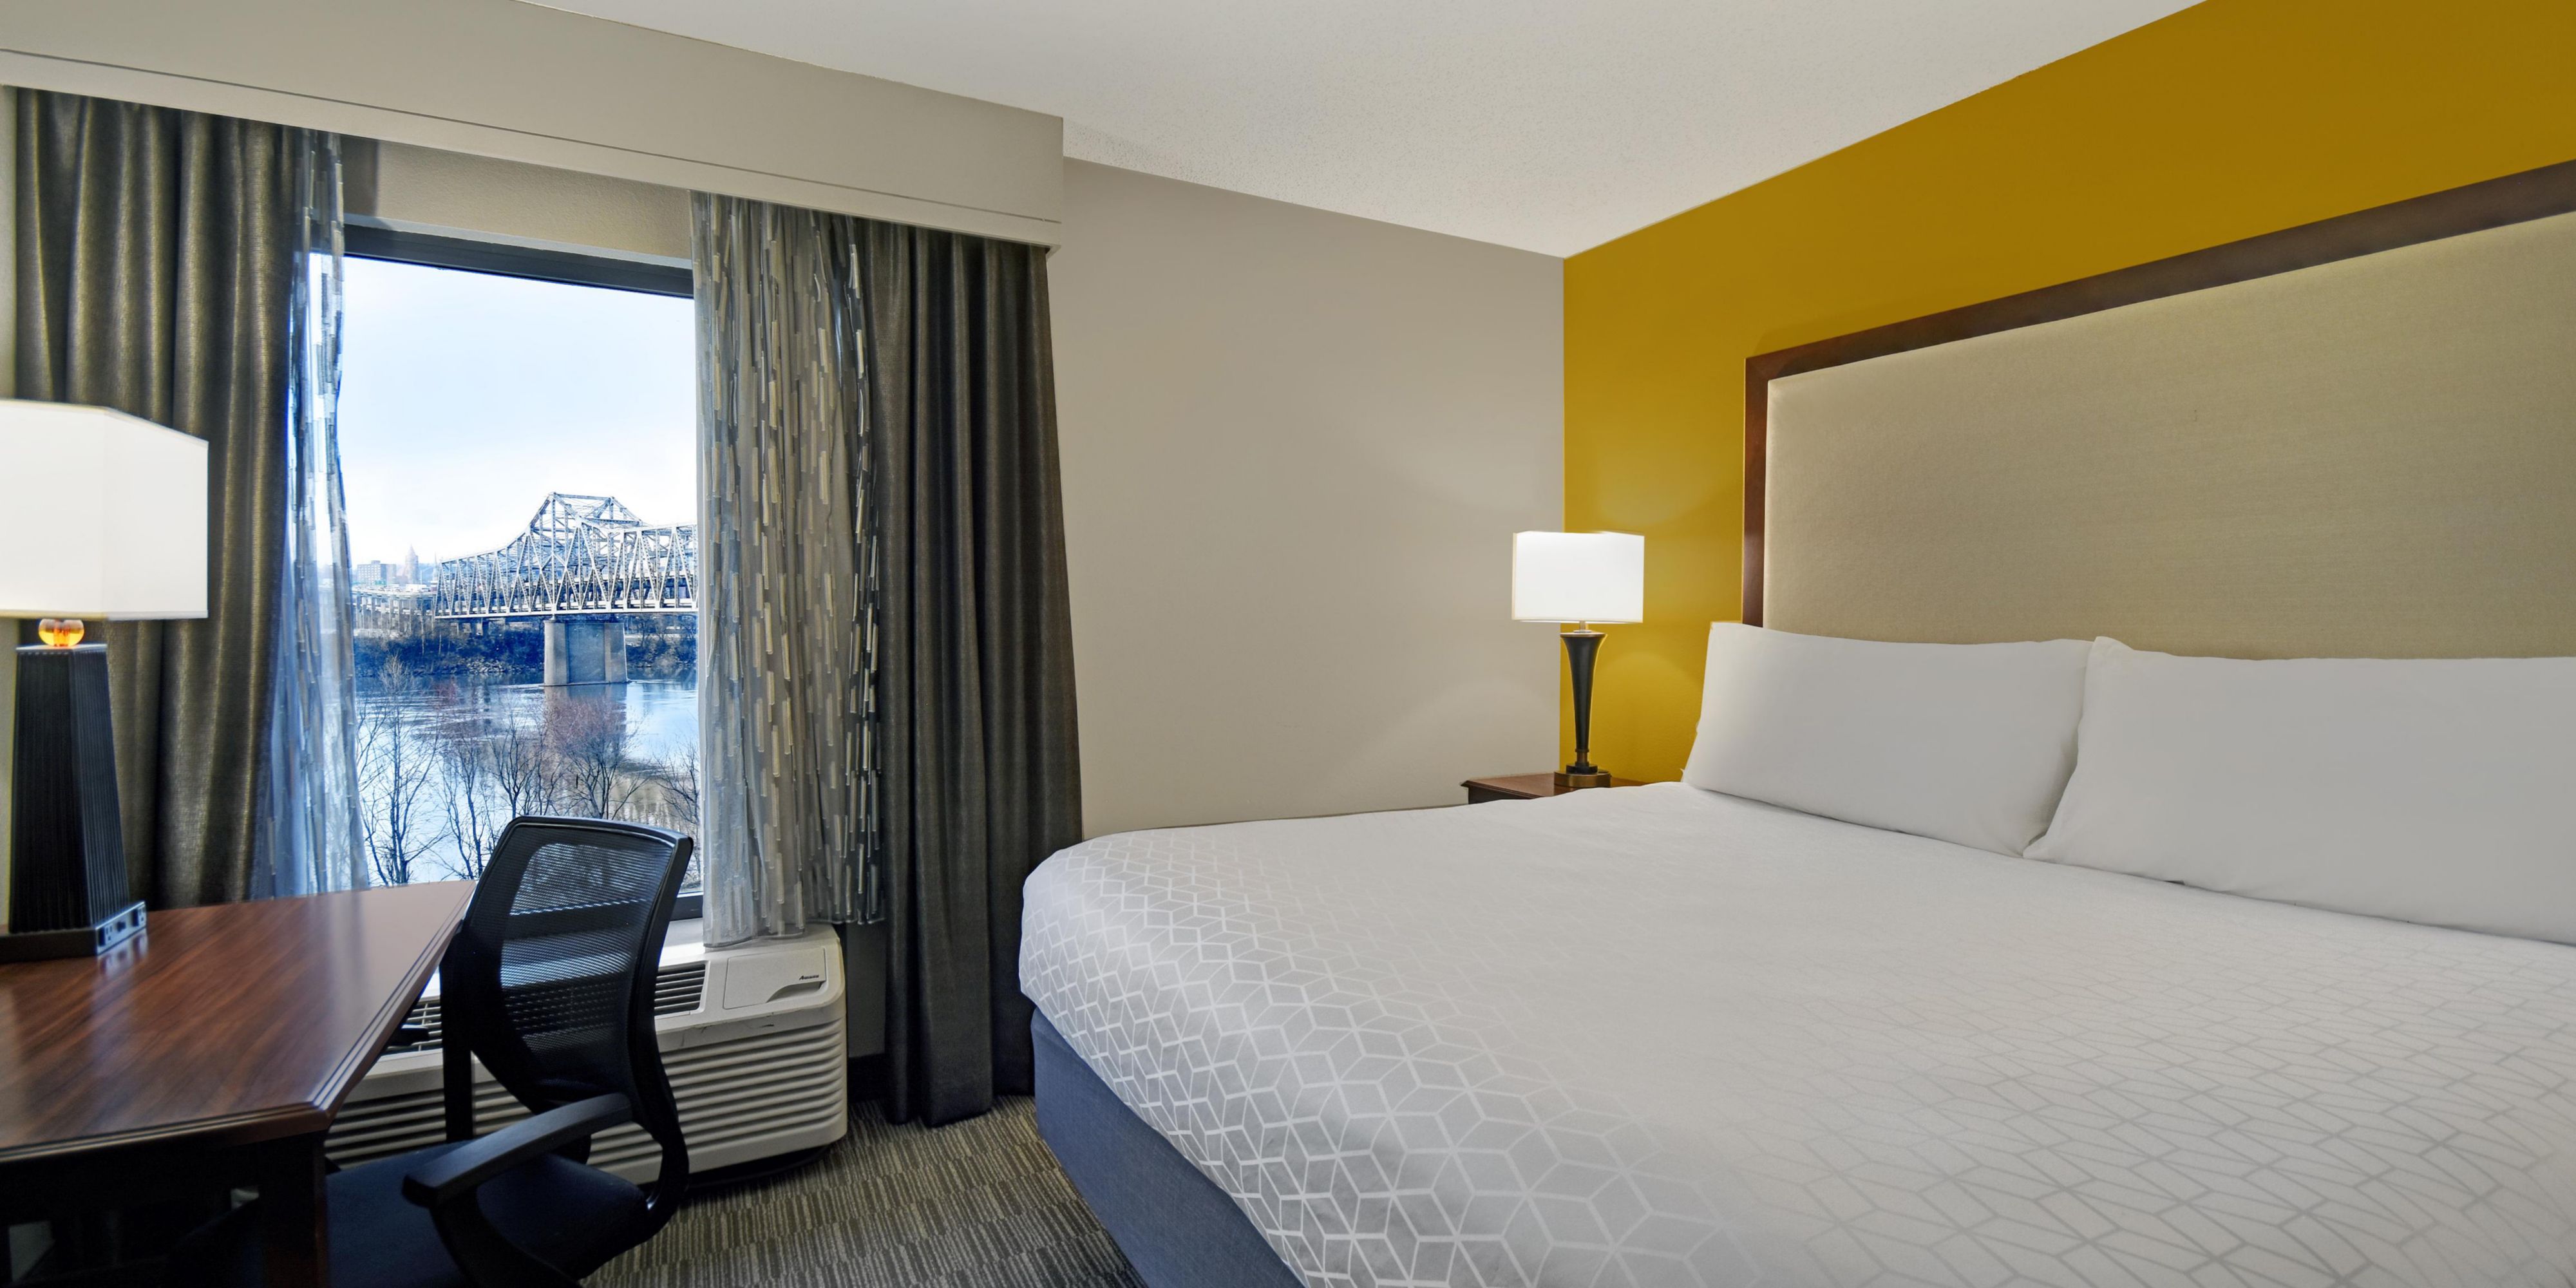 Take a virtual tour of the Holiday Inn Express & Suites Cincinnati Riverfront!